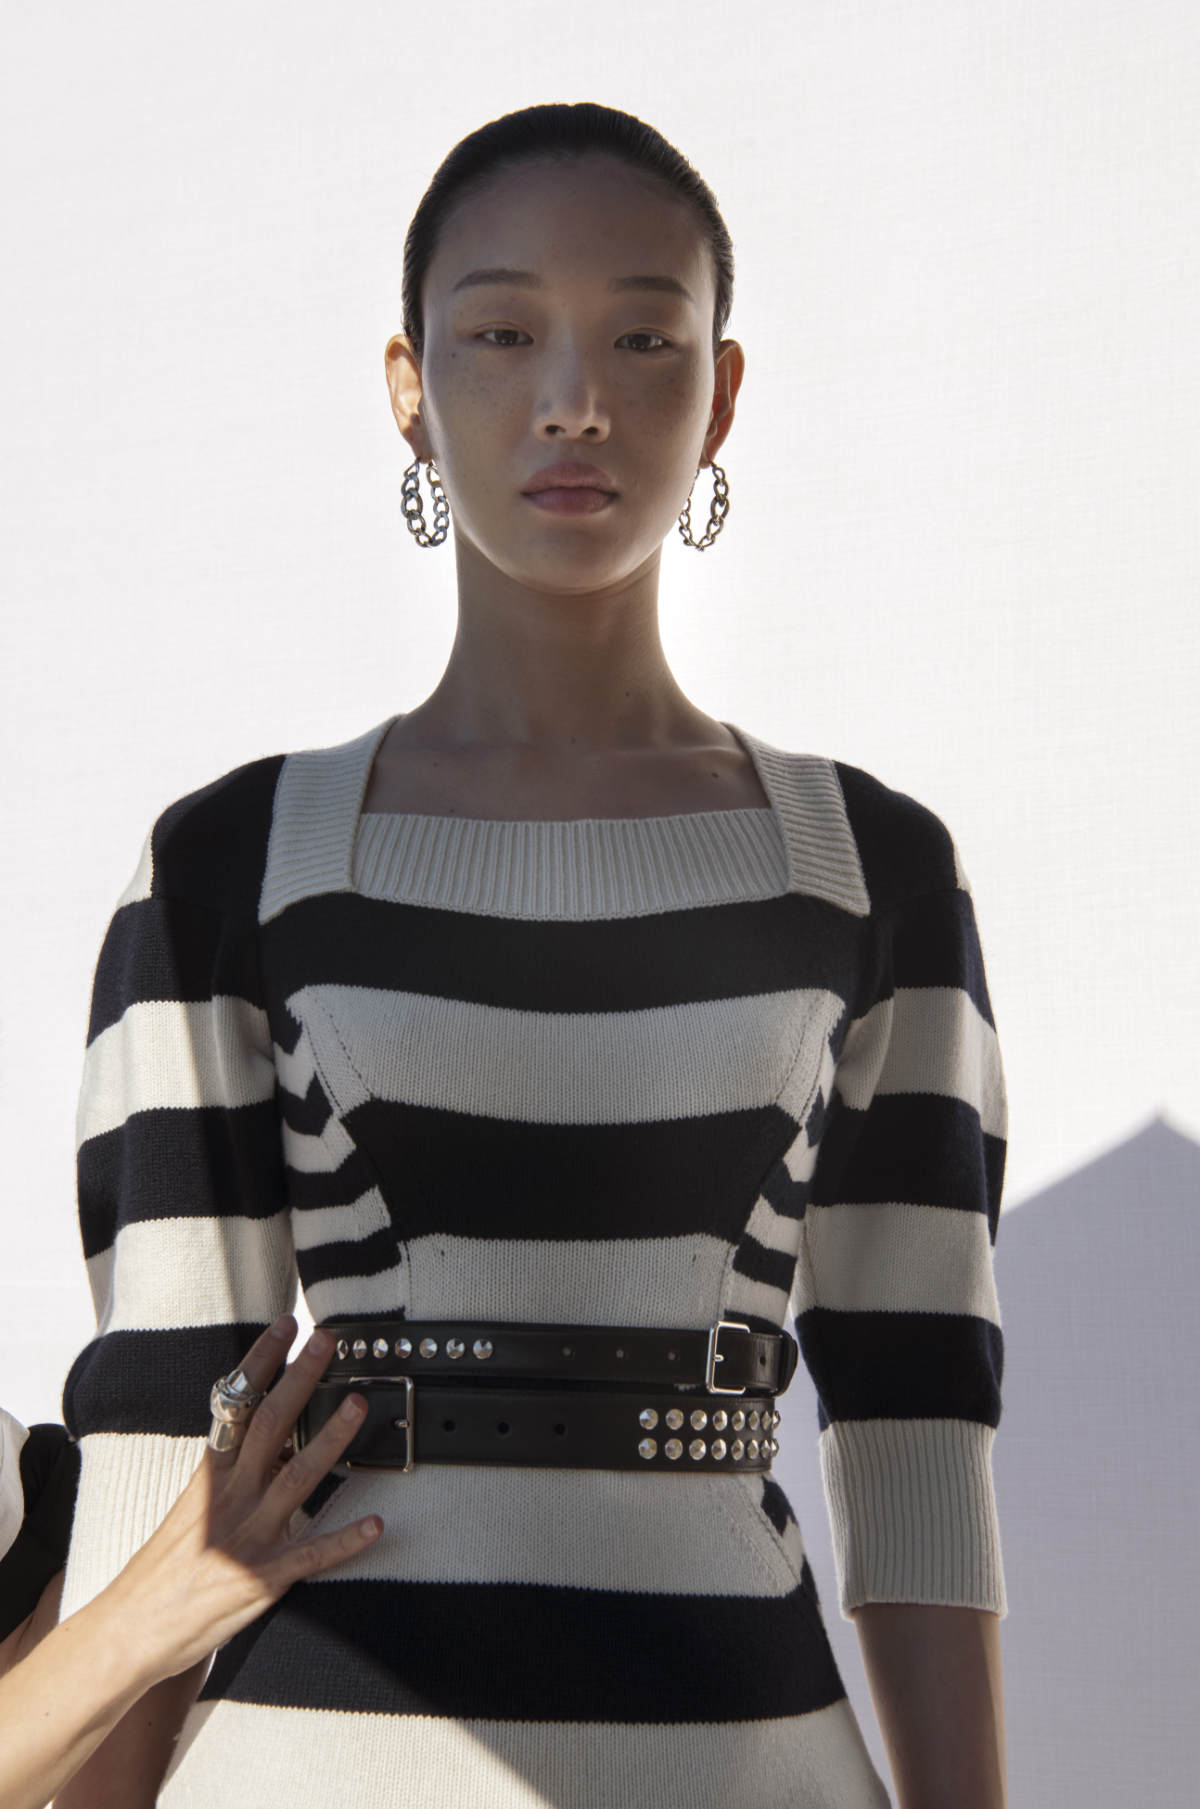 Alexander McQueen Presents New Ideas With Its Hybrid Knitwear